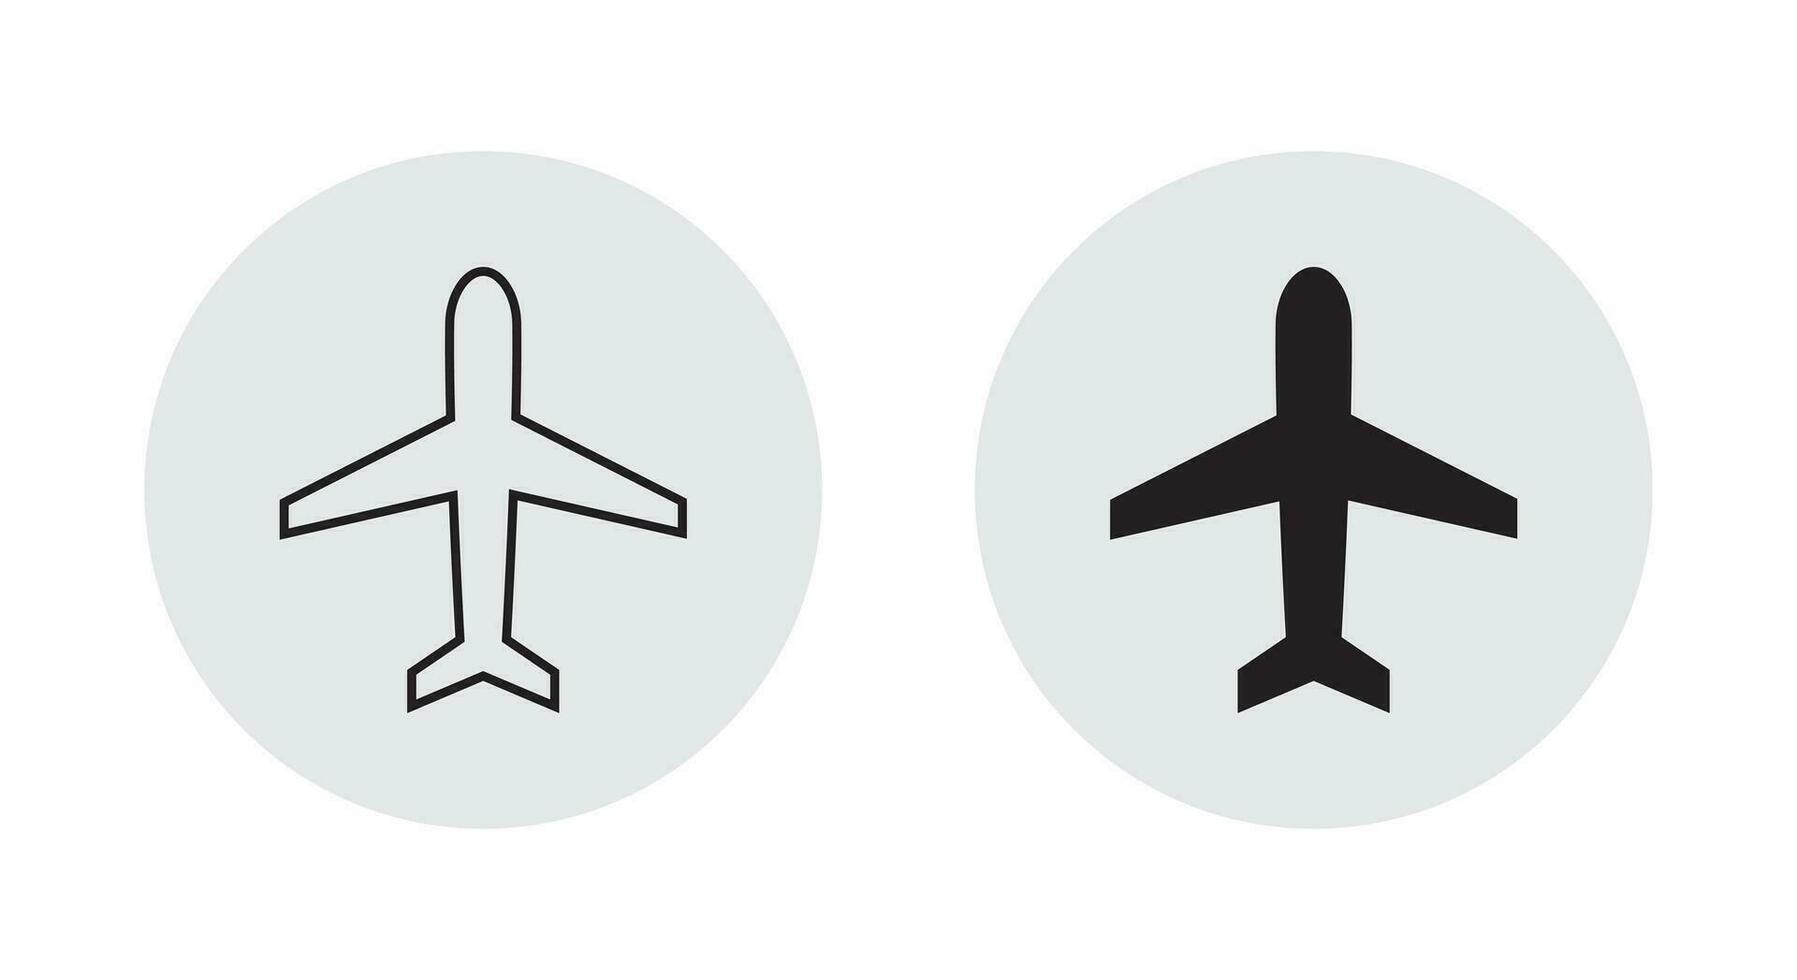 Airplane mode button icon vector in flat style. Plane sign symbol